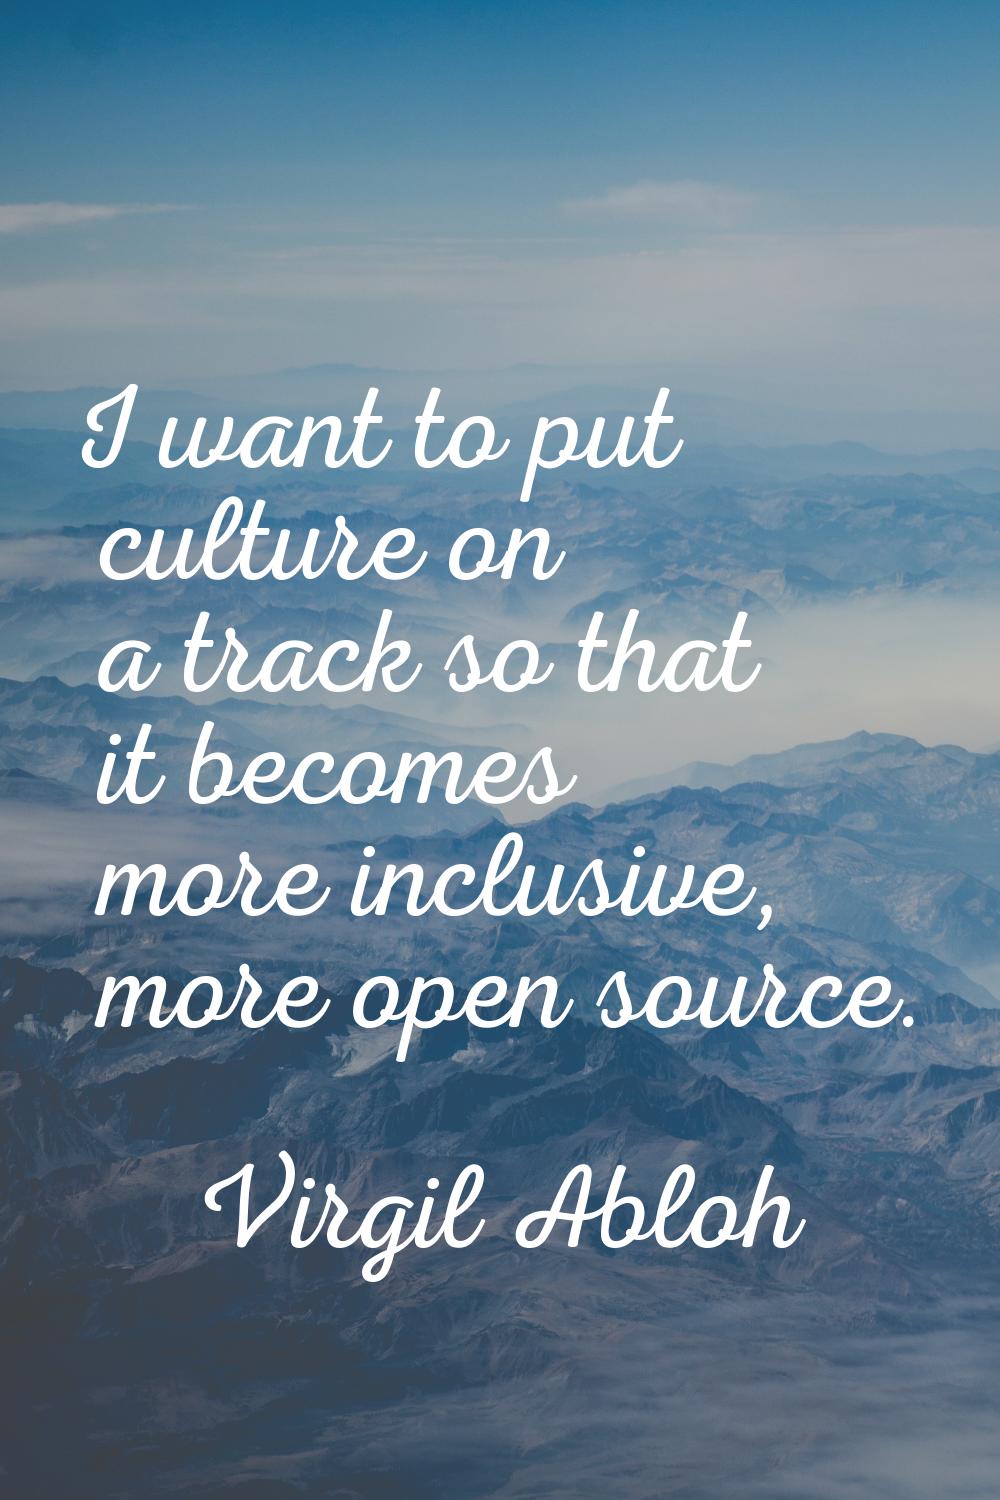 I want to put culture on a track so that it becomes more inclusive, more open source.